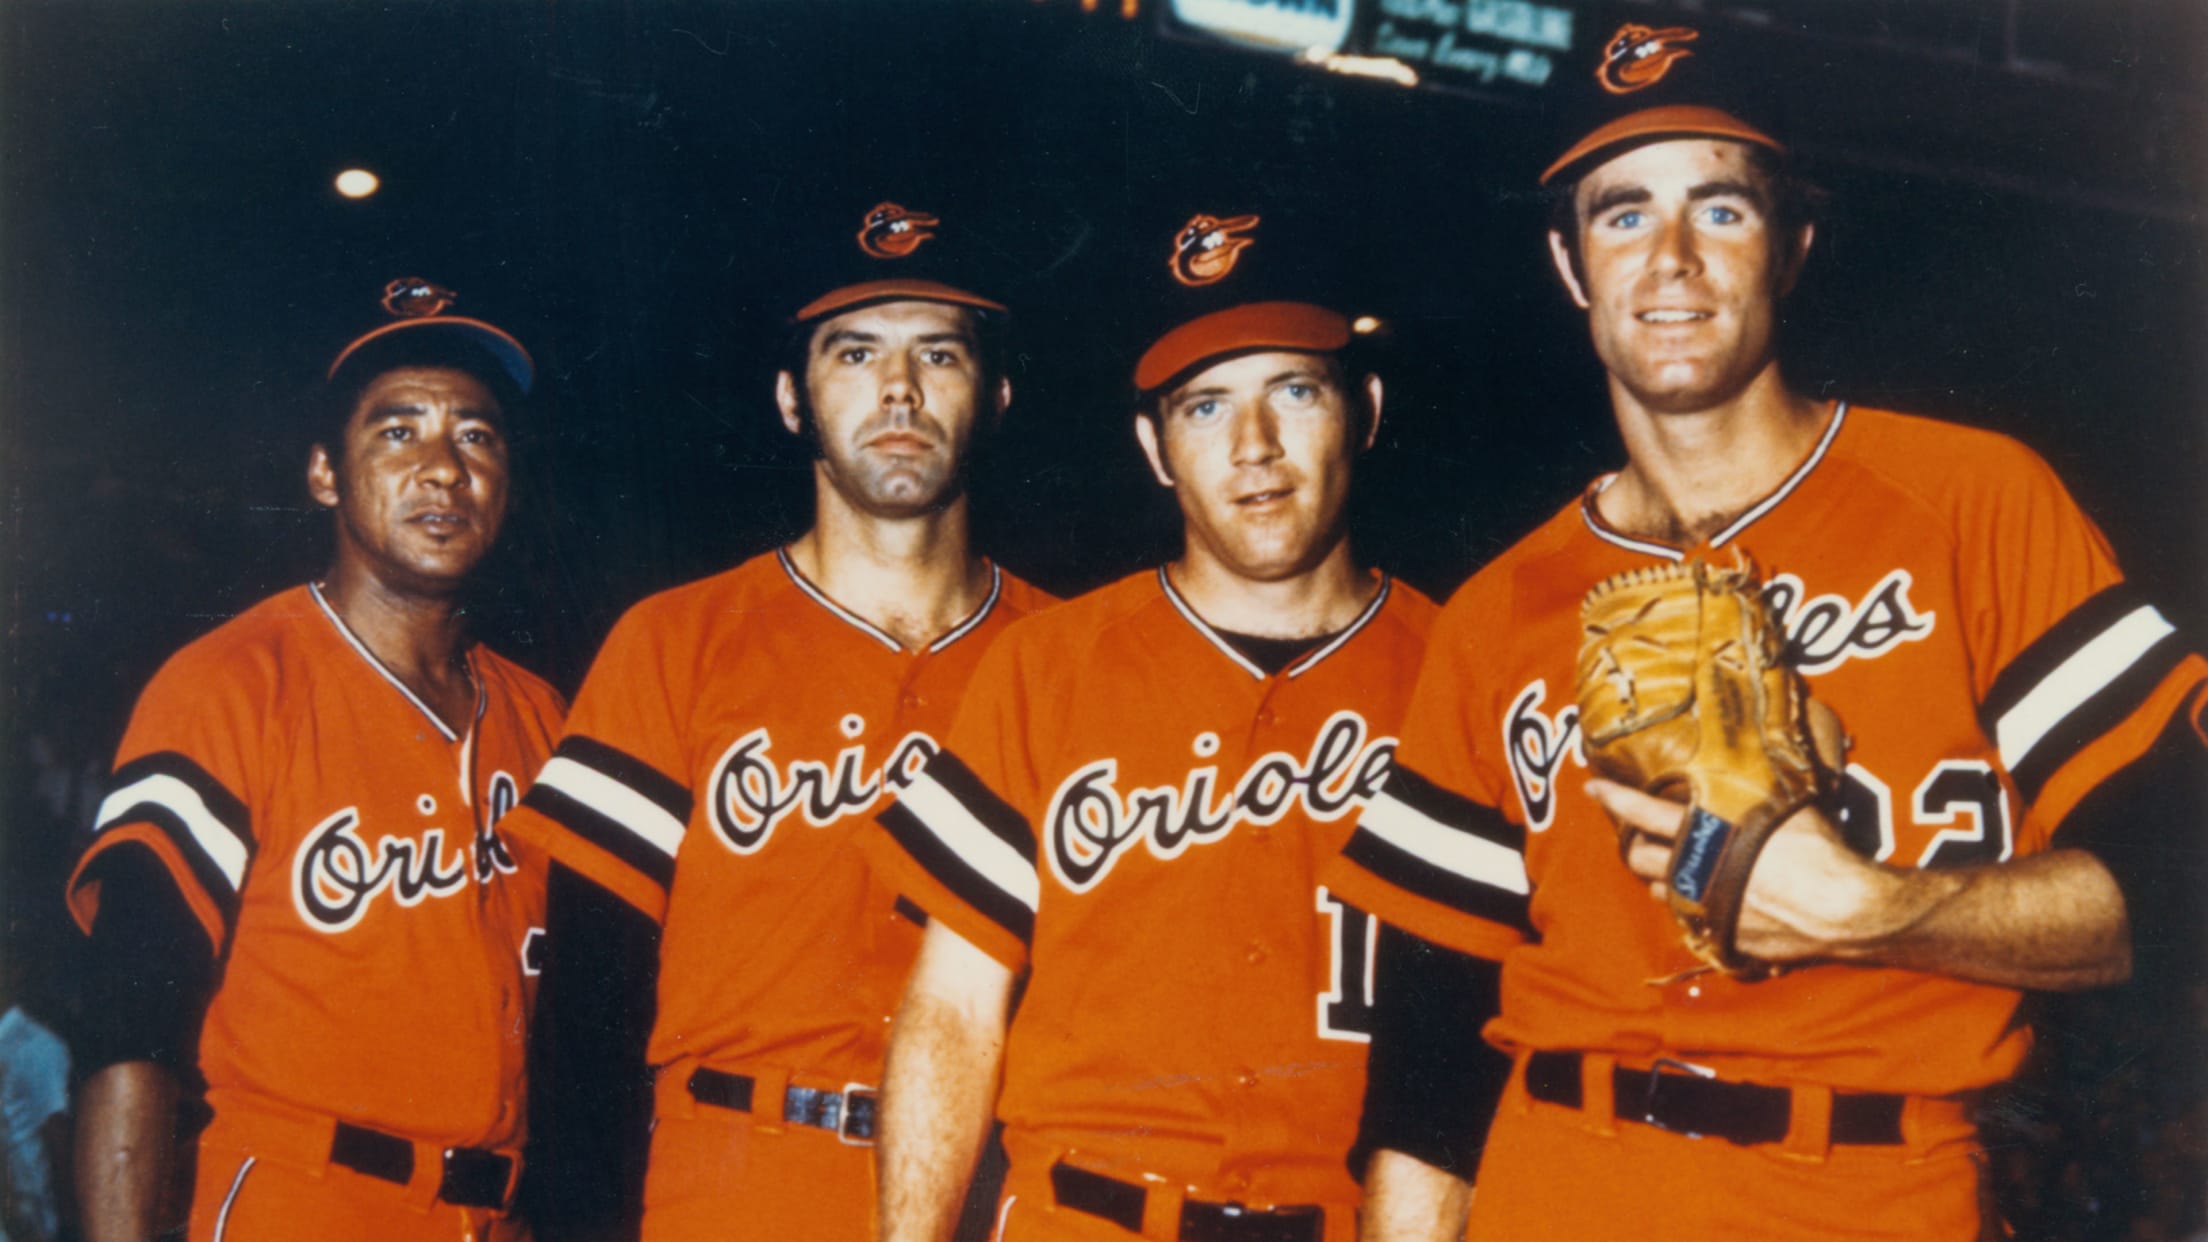 50 years ago 1971 The Baltimore Orioles had 4, 20 game winners. From left  to right Mike Cuellar 20 Pat Dobson 20 Dave McNally 21 Jim Palmer 20. This  year they don't even have 40 wins total. : r/baseballcards